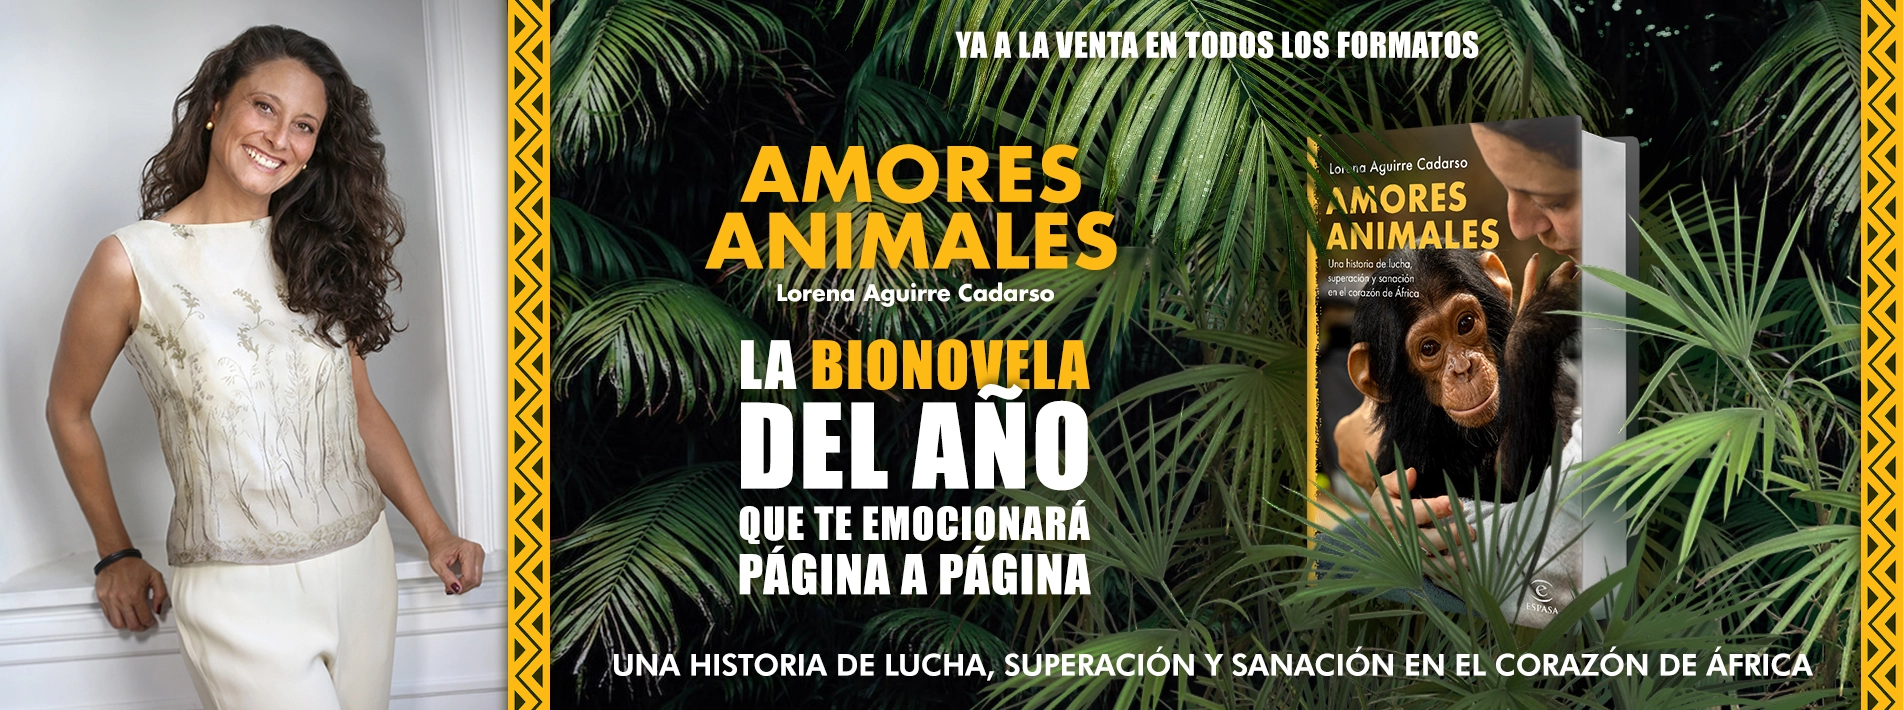 Amores-Animales